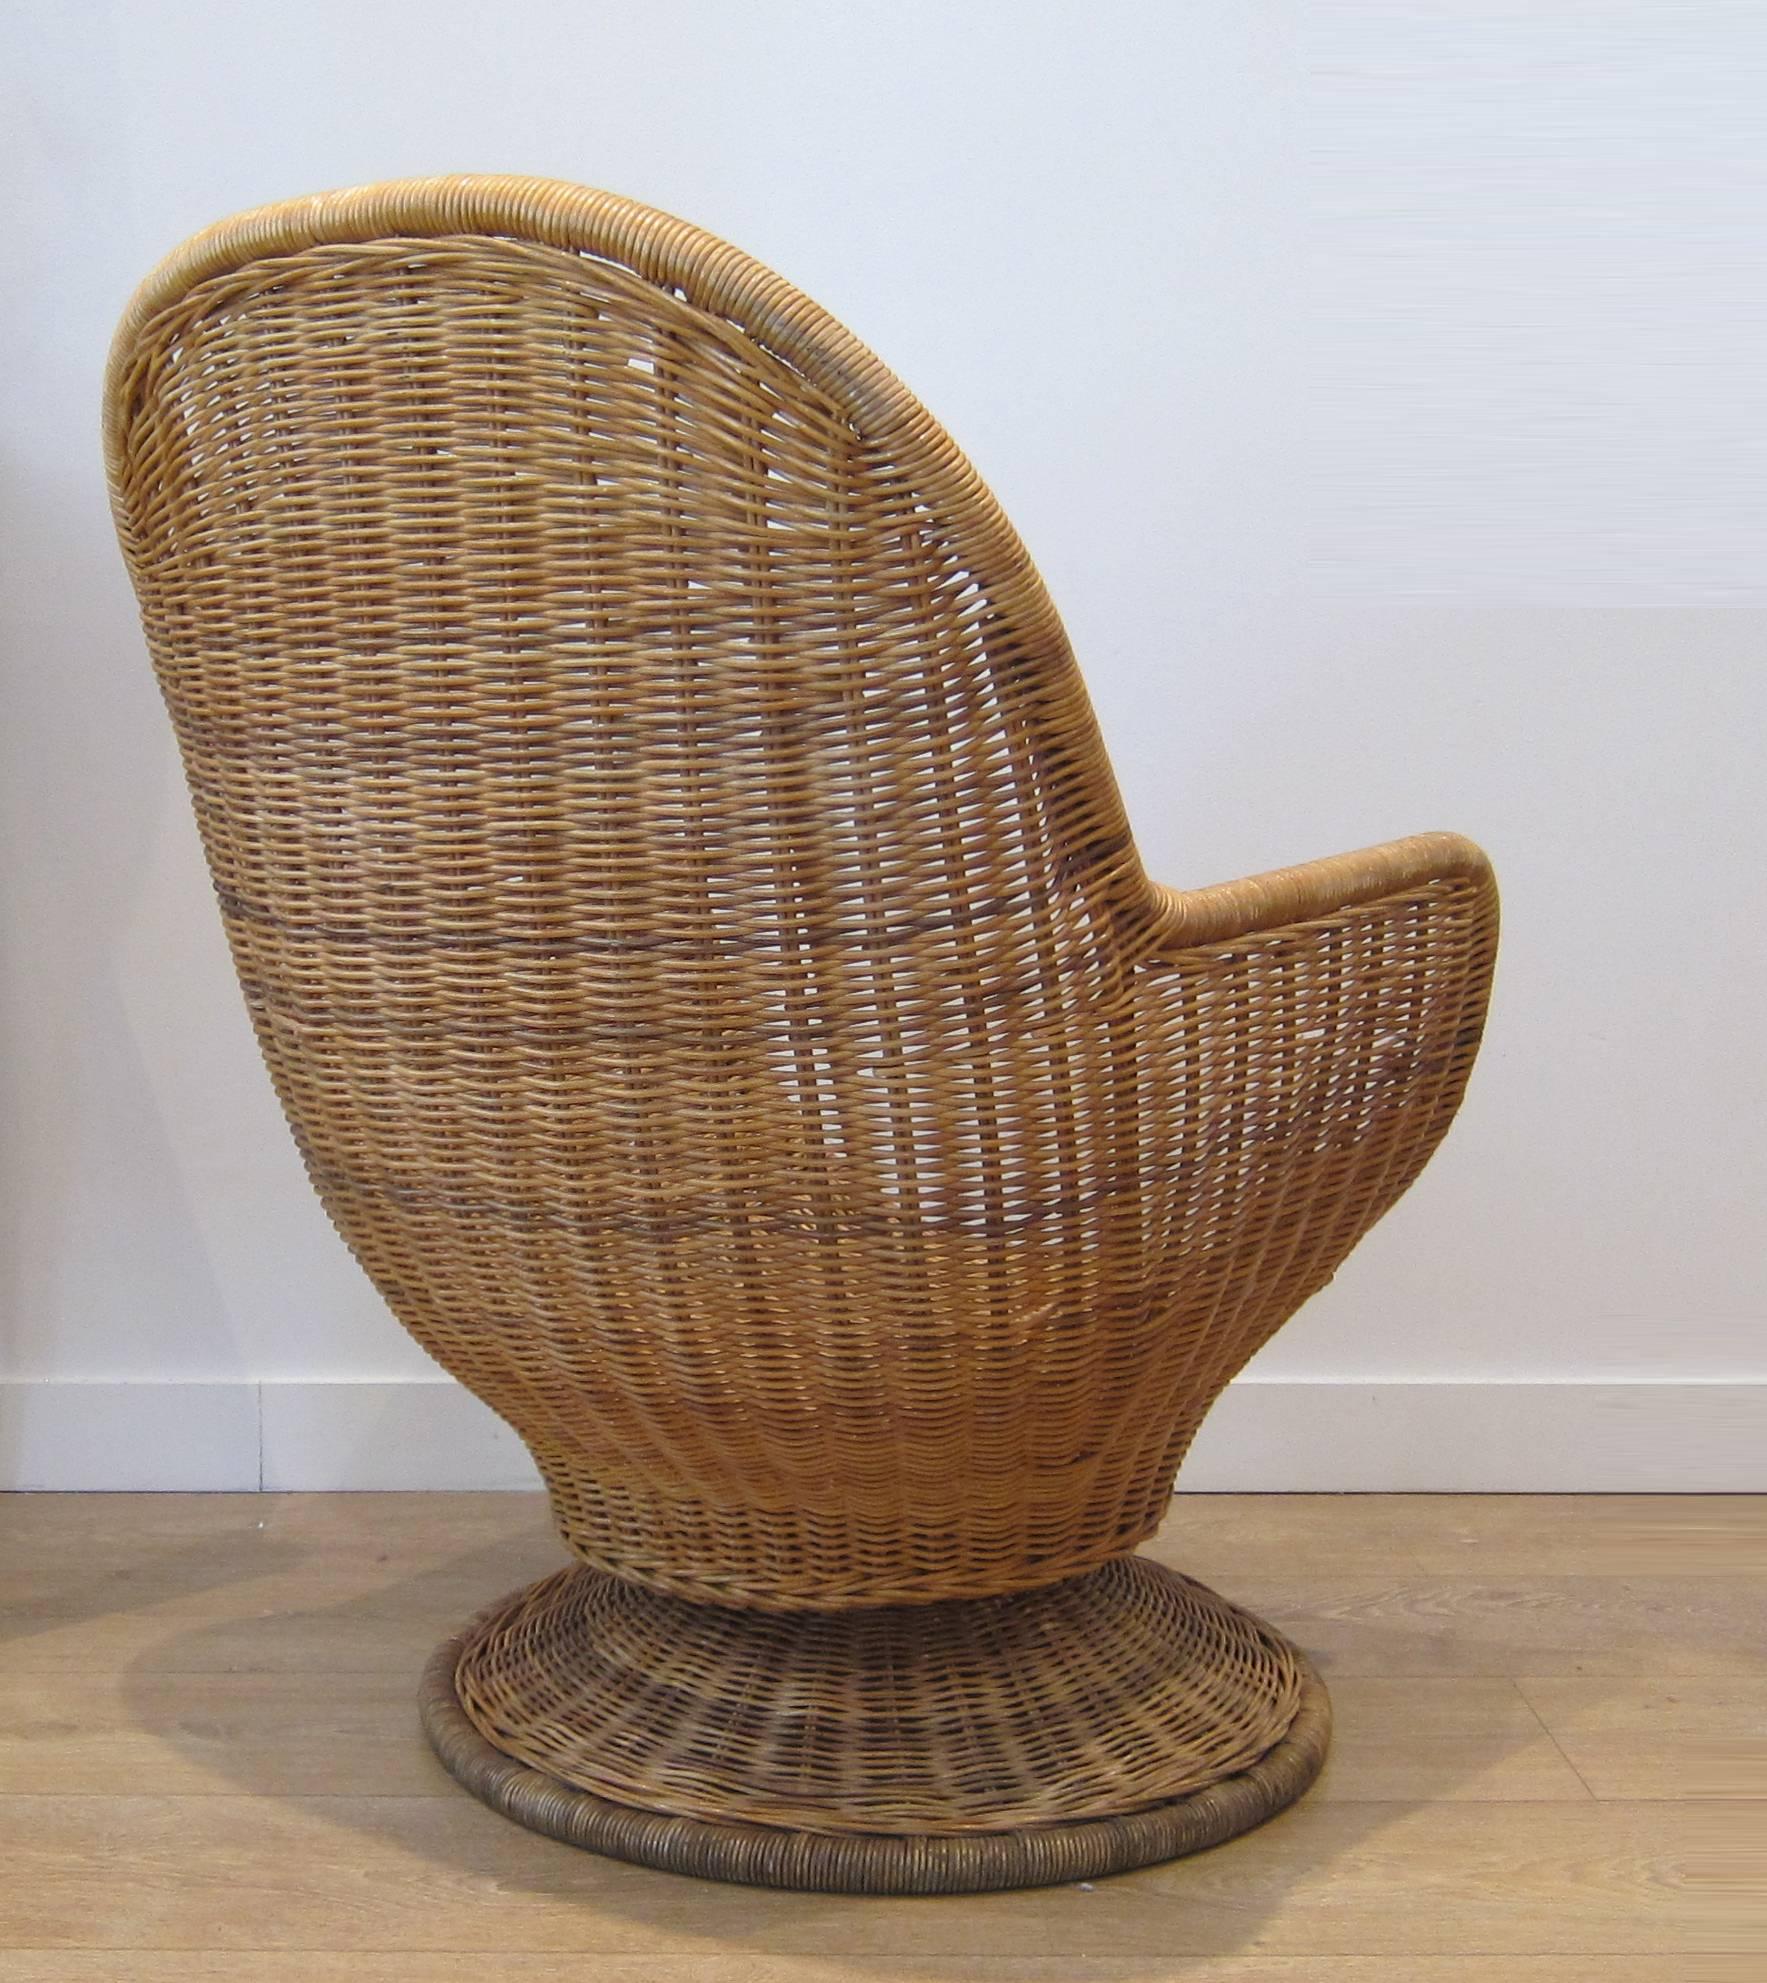 Amazing pair of large egg shape rattan chairs. They feature both swivel and tilt functions. Sold as is (no pads or upholstery.) Chairs are well constructed.